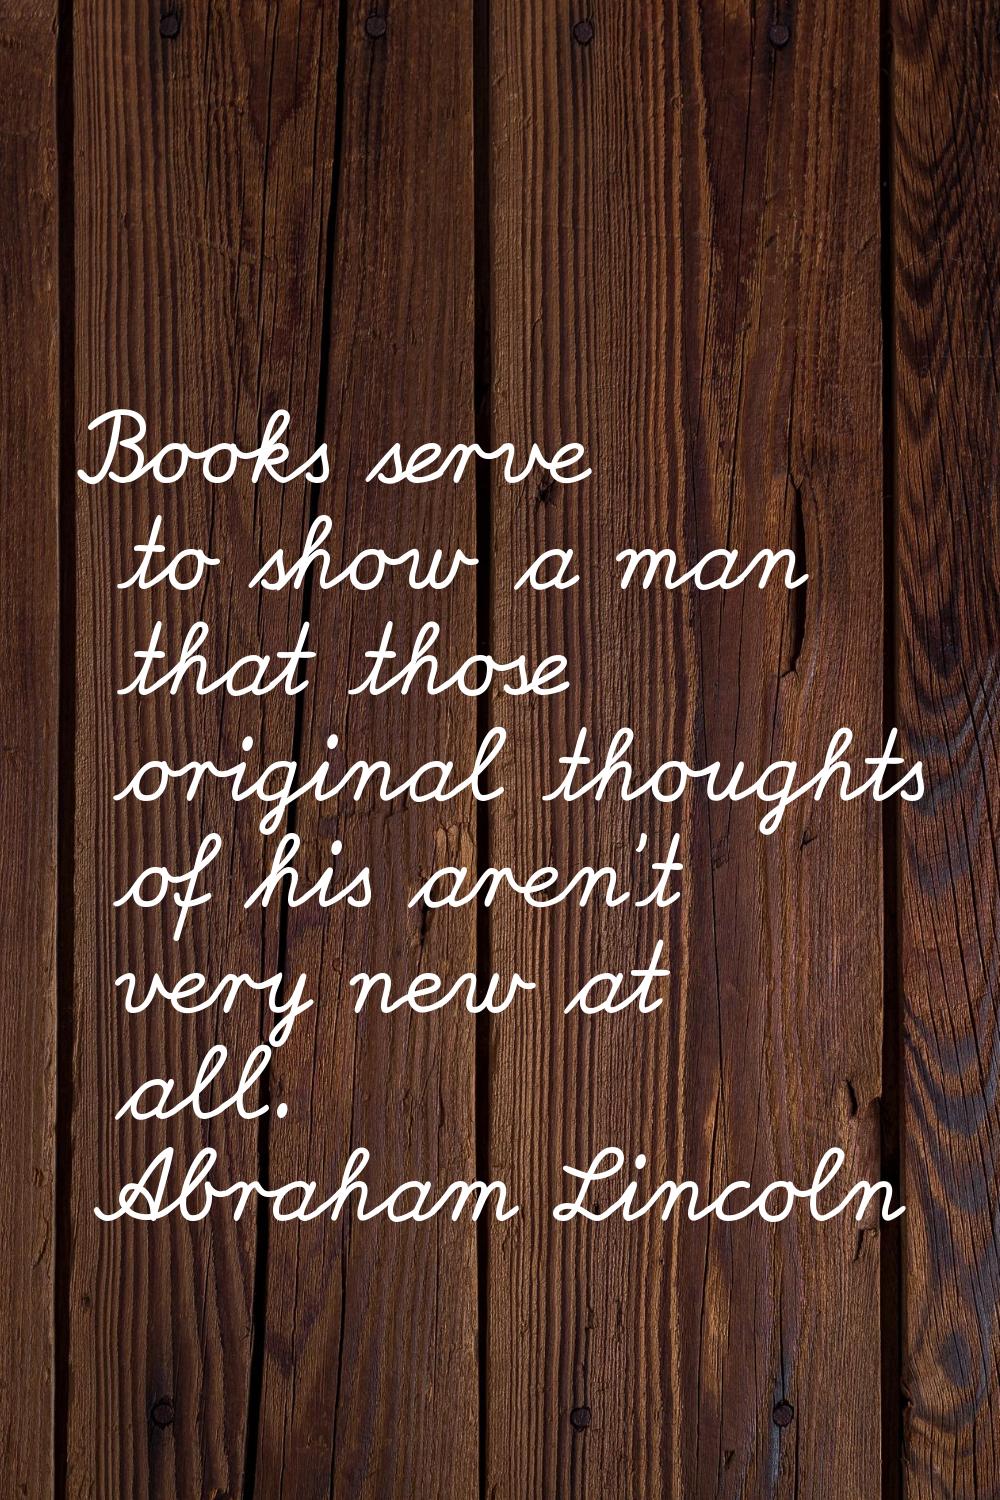 Books serve to show a man that those original thoughts of his aren't very new at all.